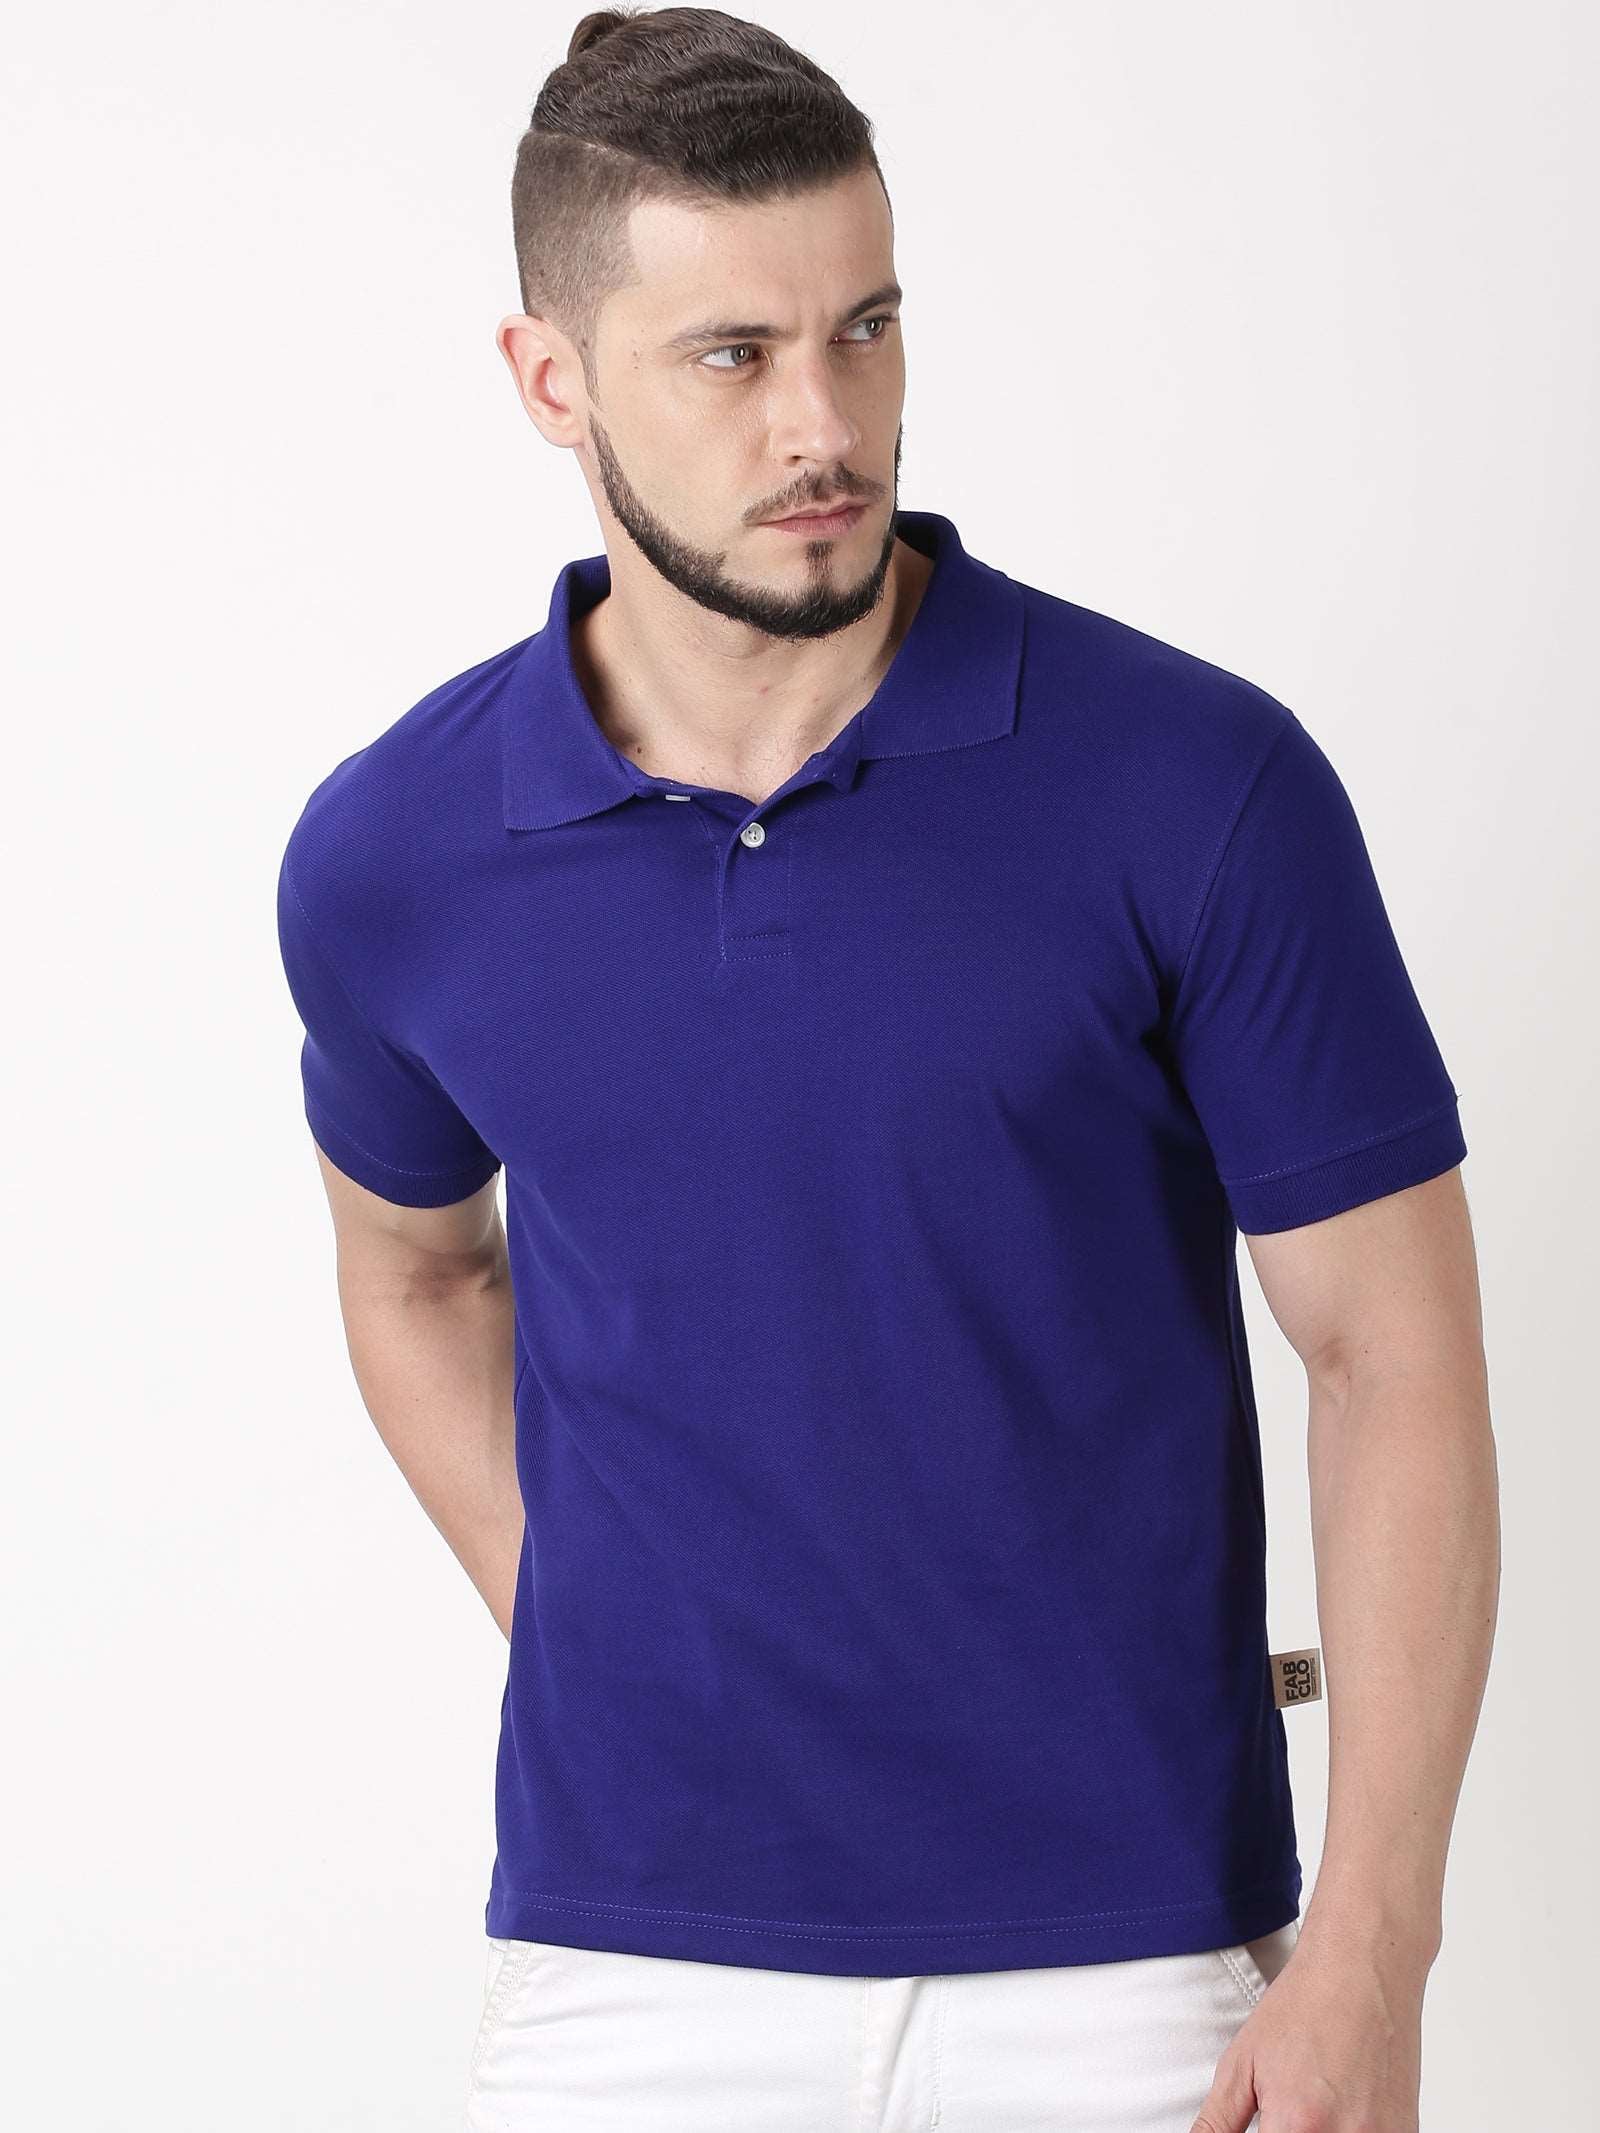 Organic Cotton Polo, Natural Fabric, No Synthetic Dyes.